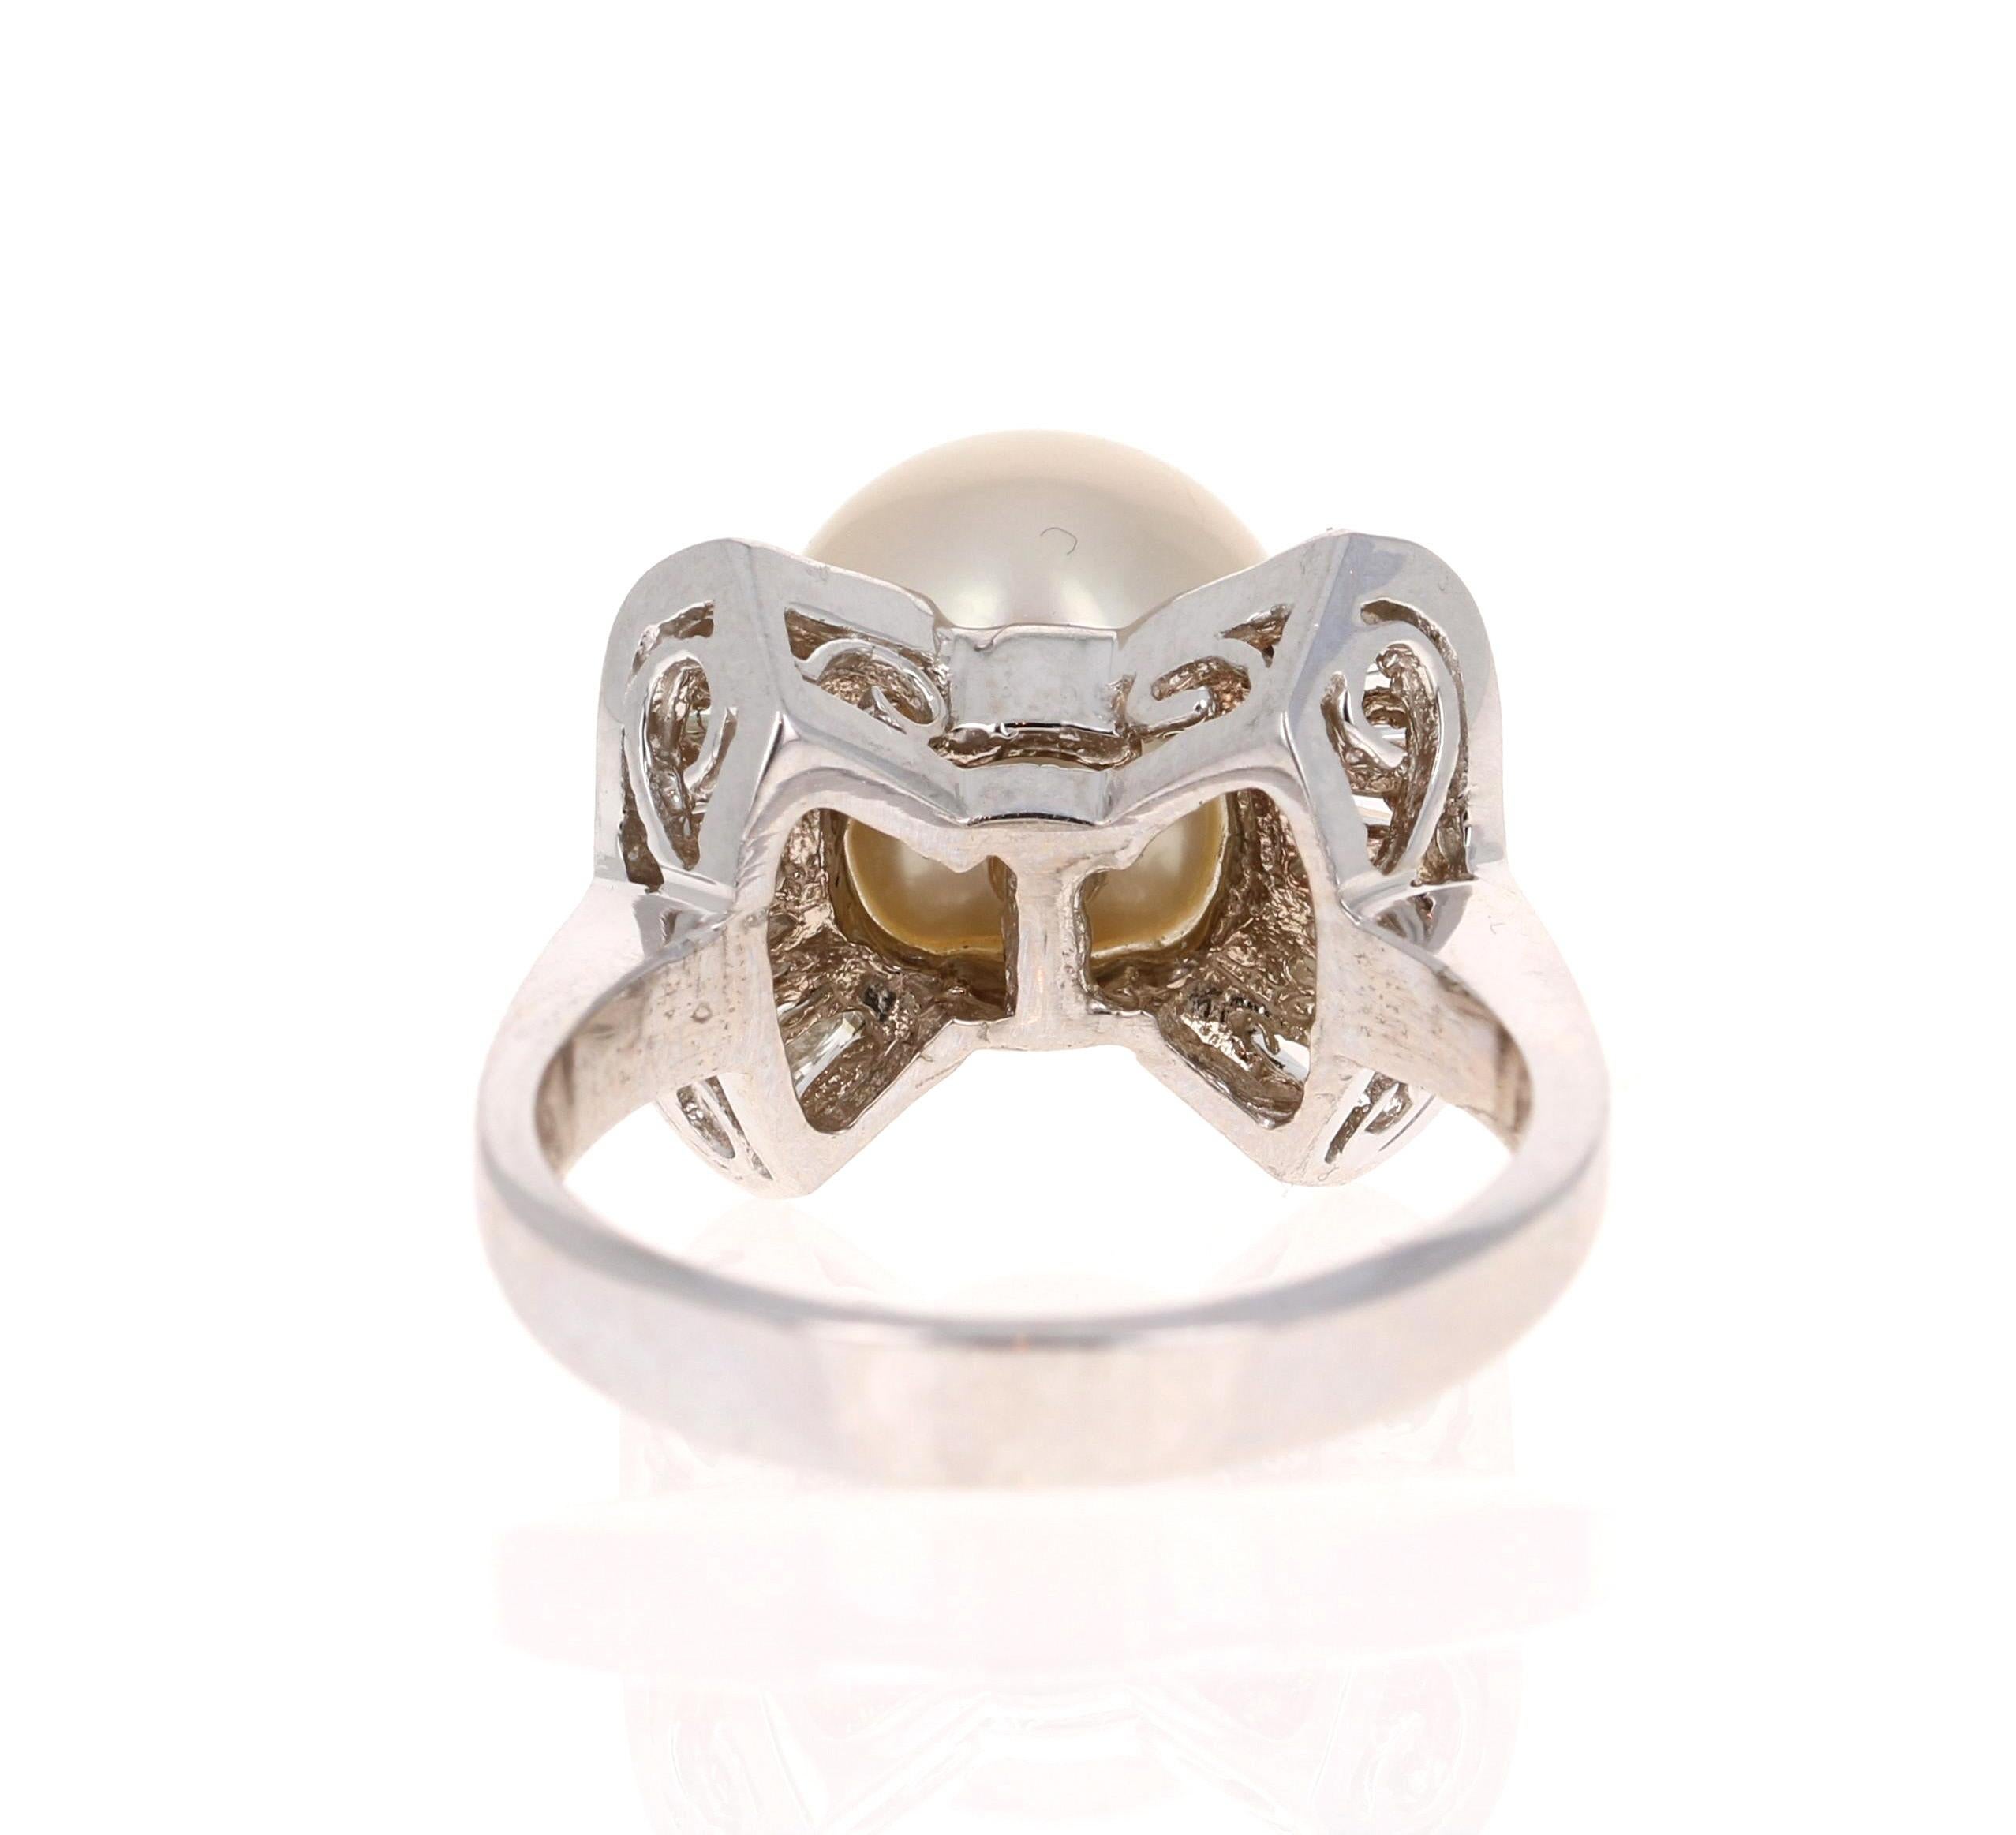 Baguette Cut South Sea Pearl and Diamond 14 Karat White Gold Cocktail Ring